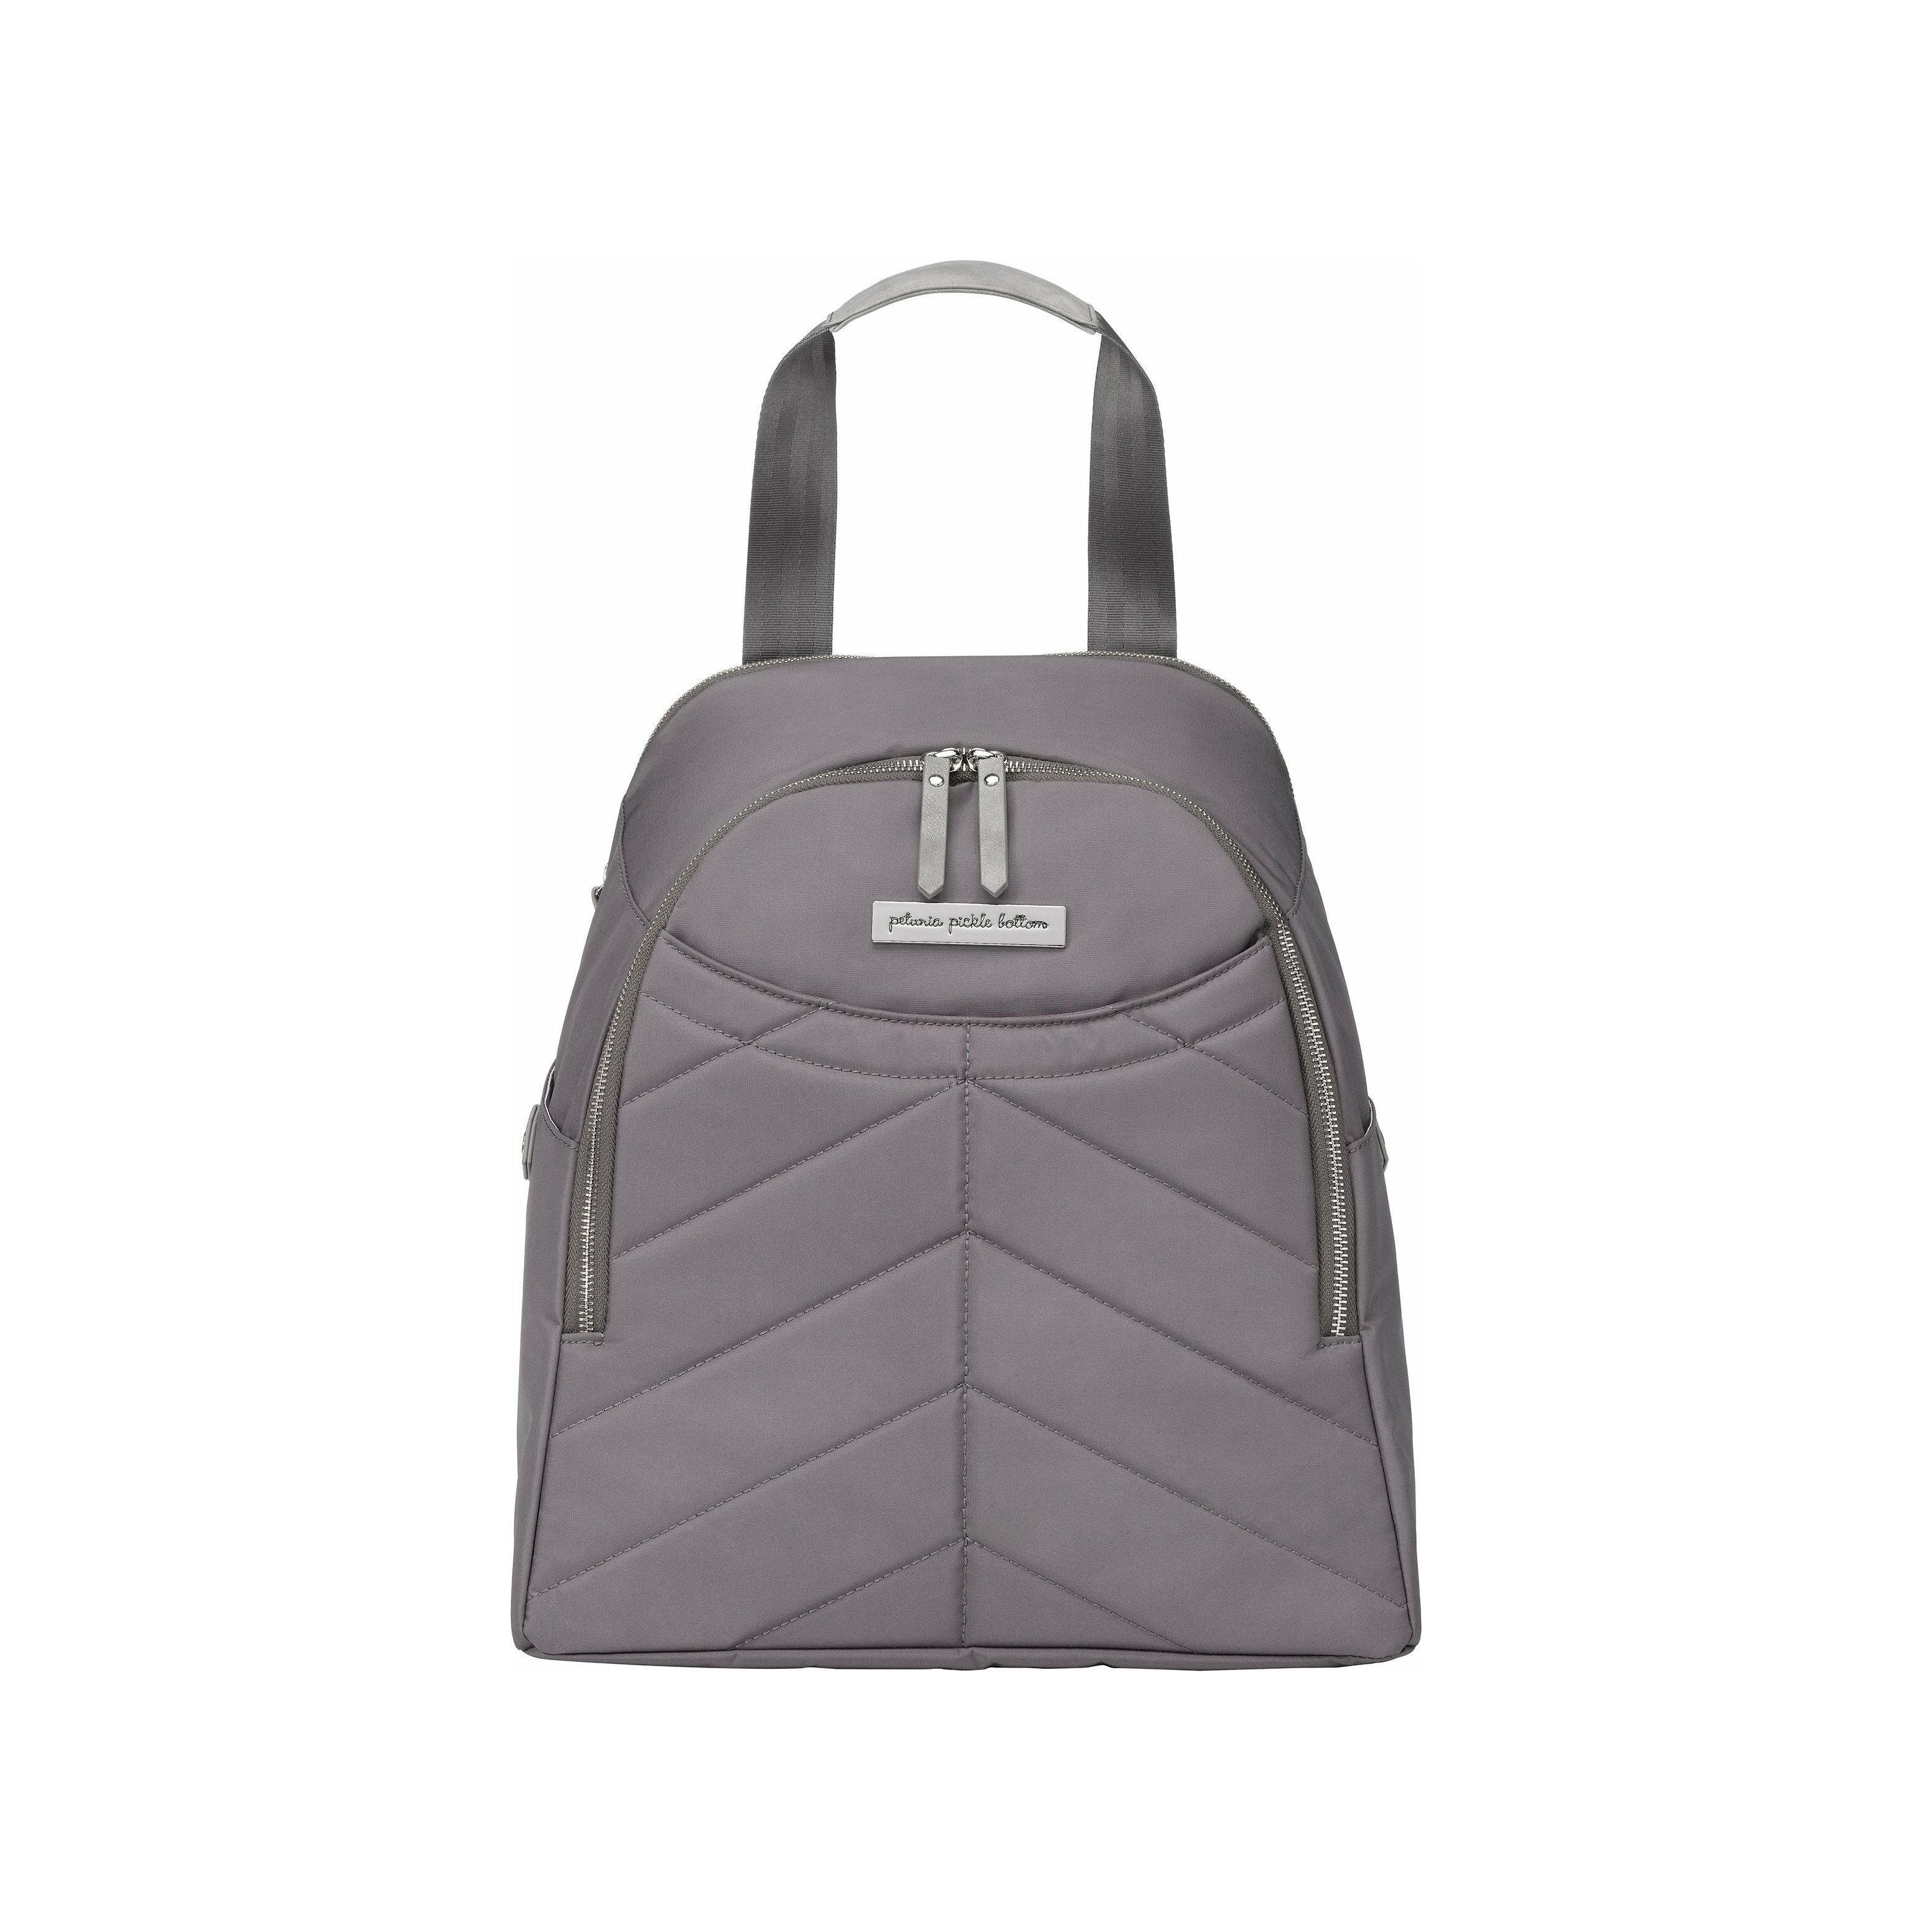 Petunia Pickle Bottom Intermix Slope Backpack: Charcoal Microfibre